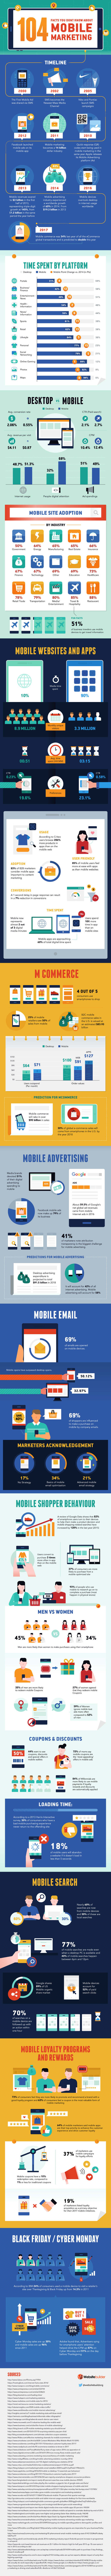 104 mobile marketing facts